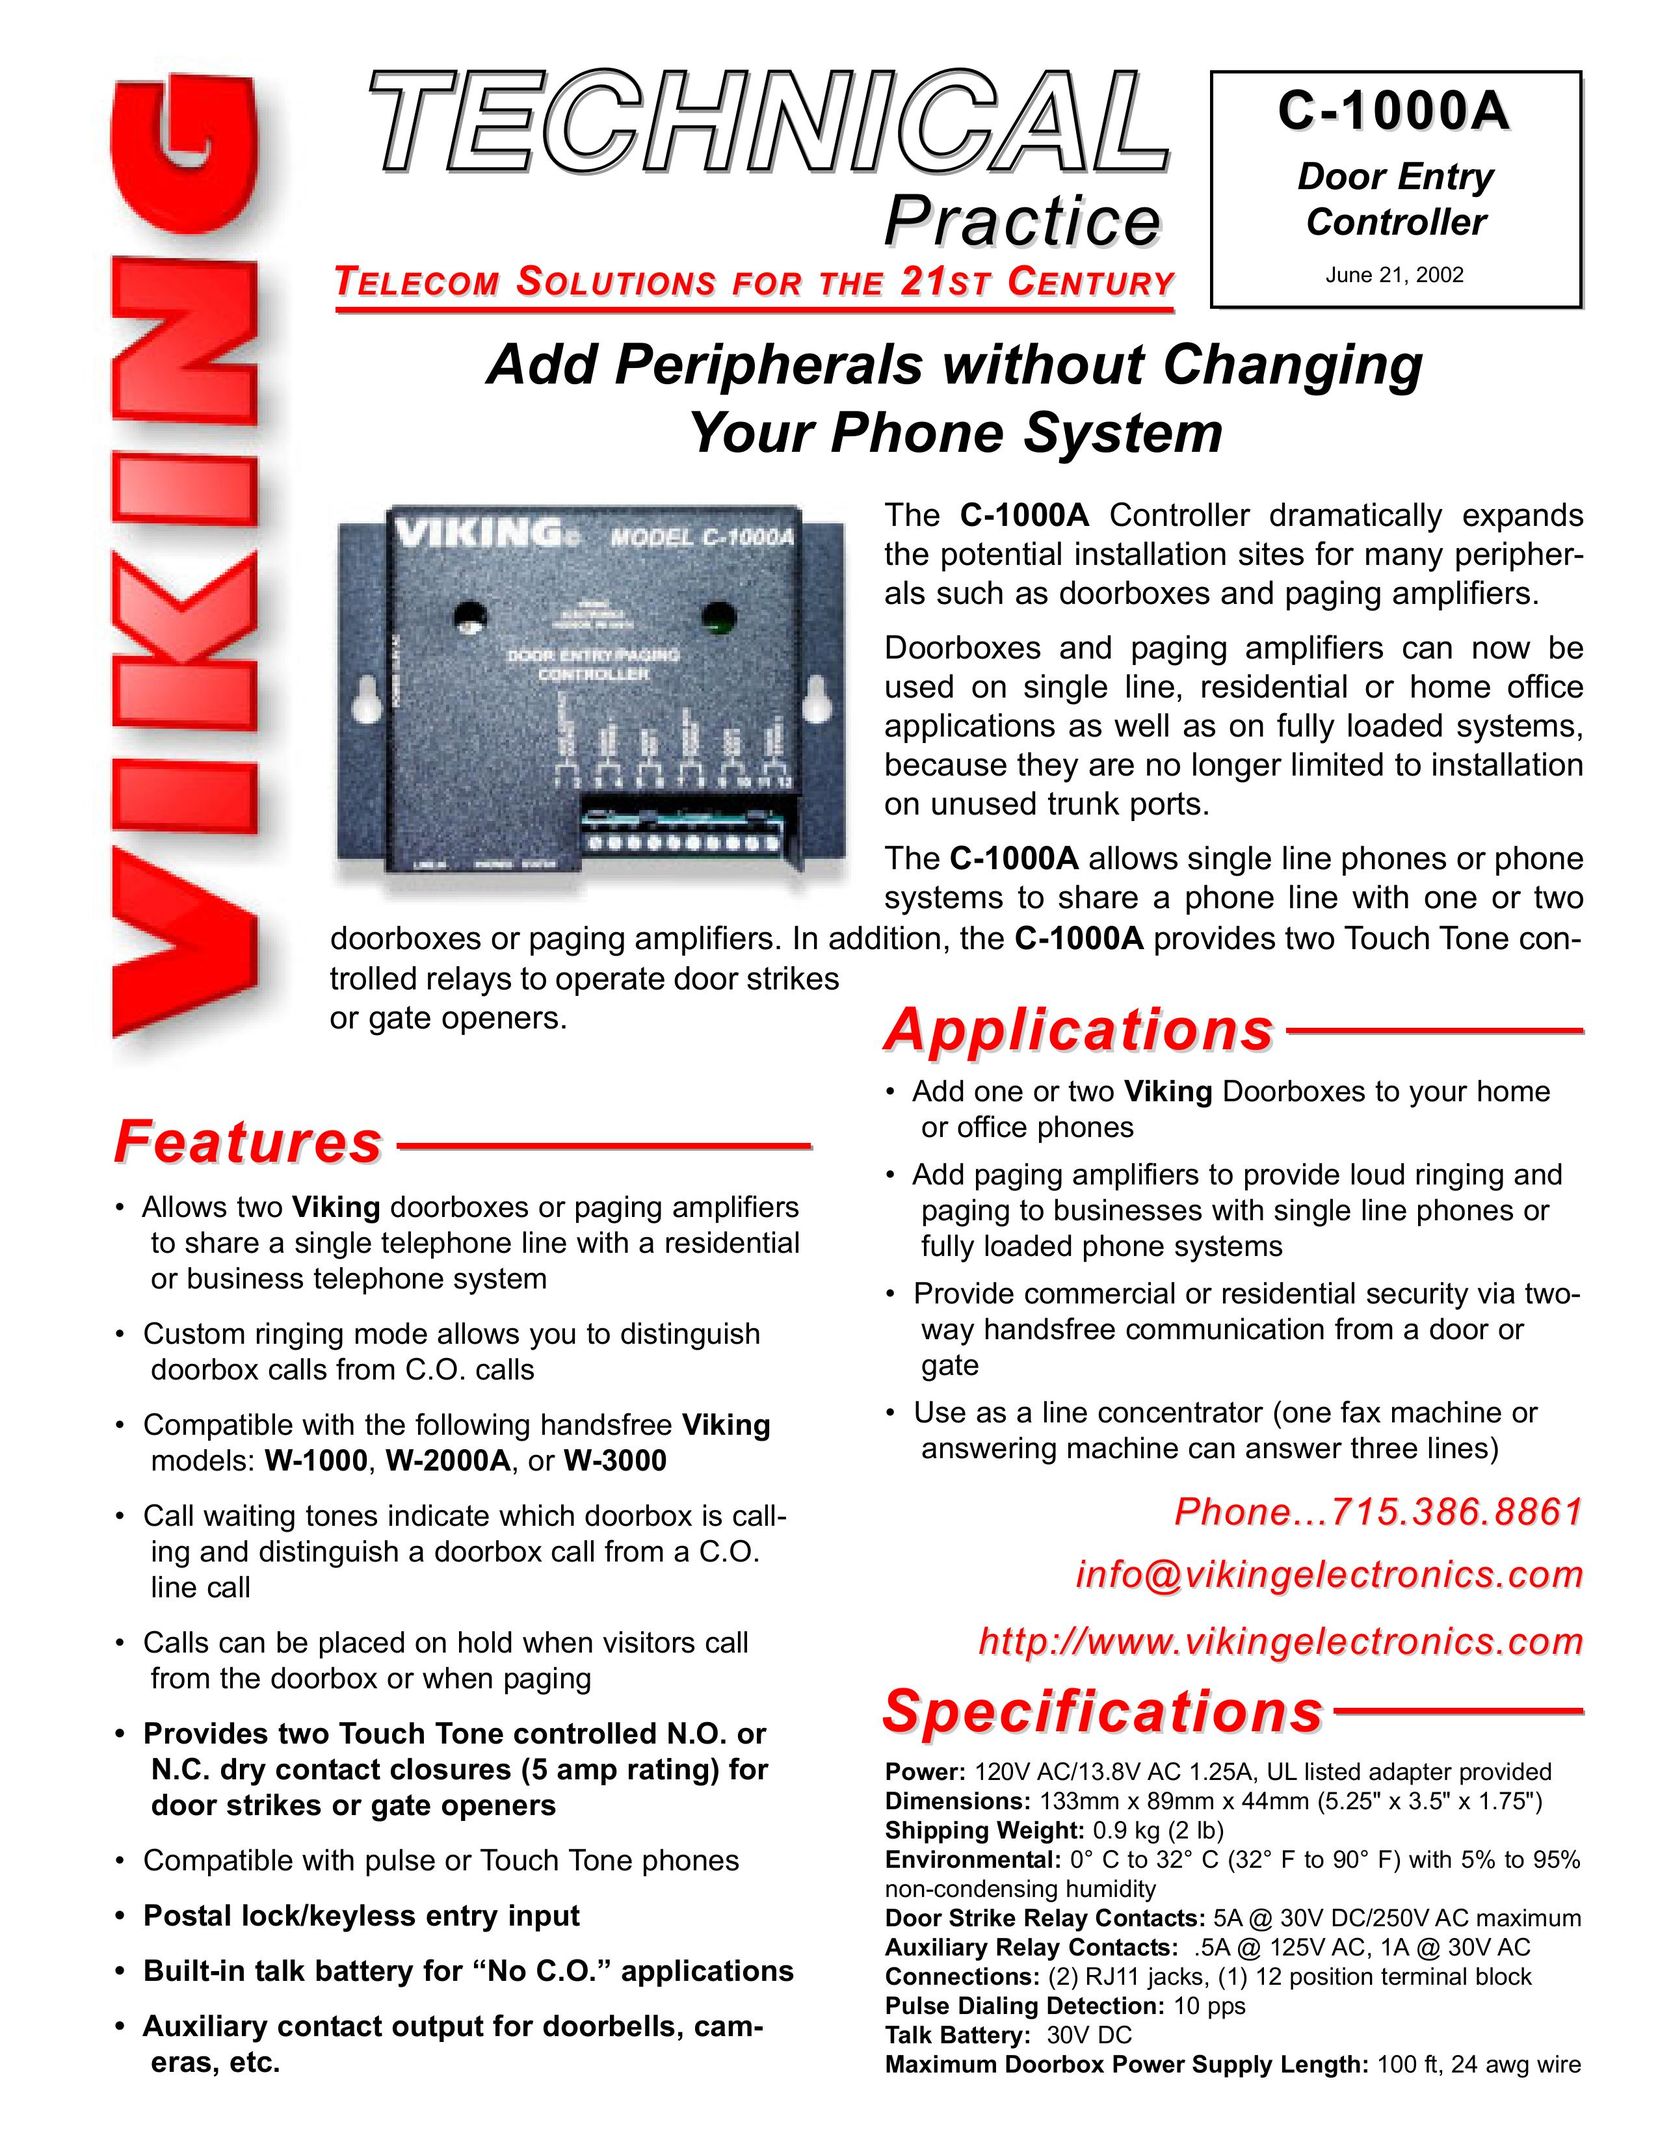 Viking Electronics C-1000A Paint Sprayer User Manual (Page 1)